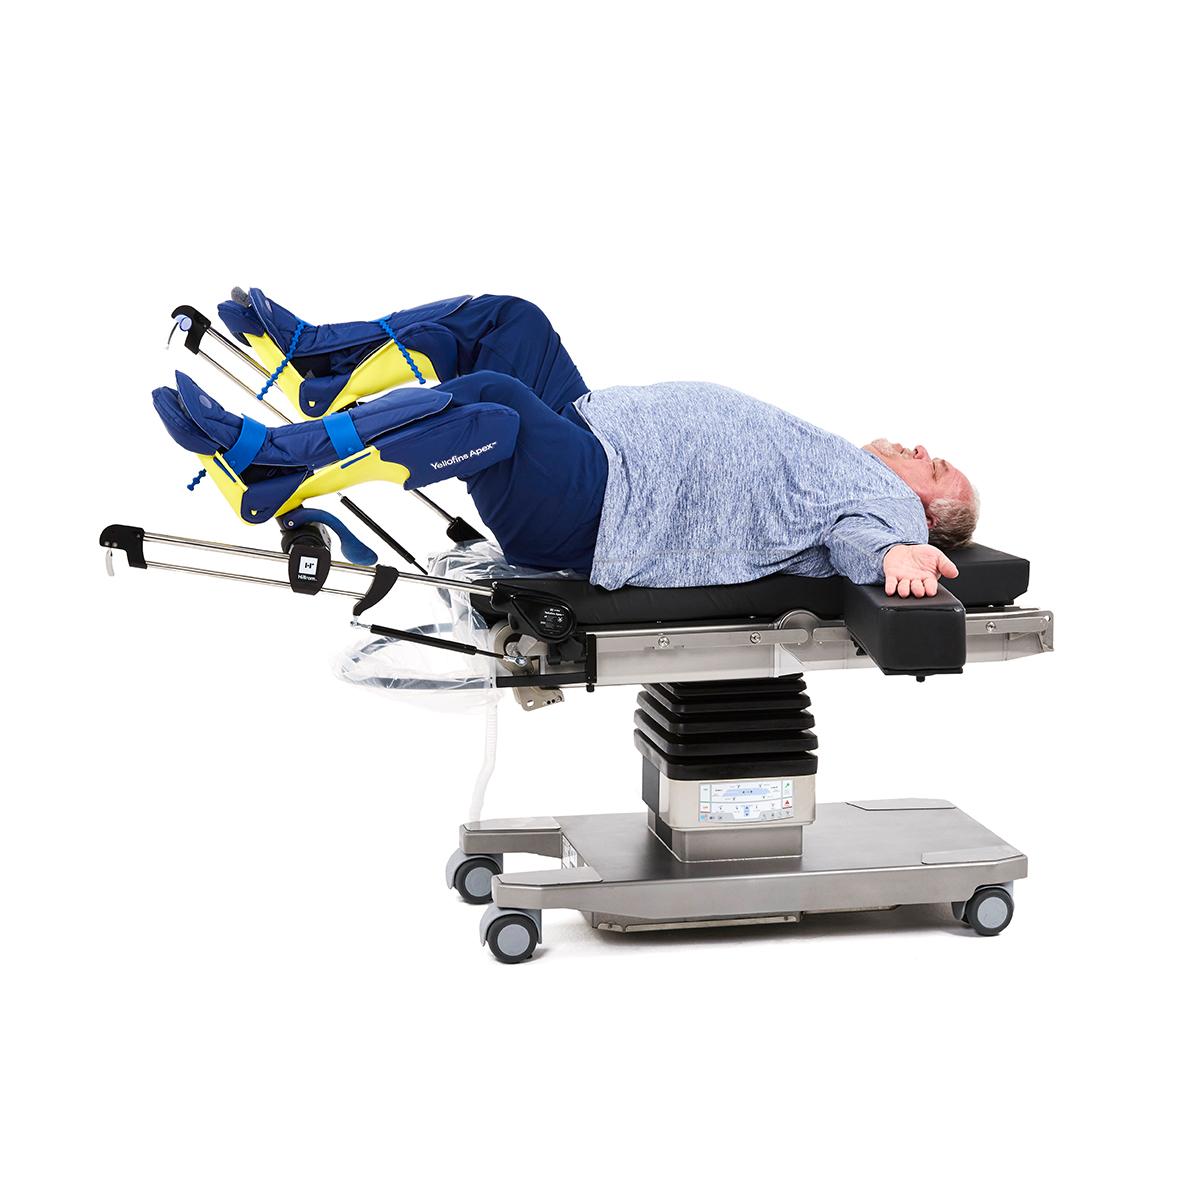 Bariatric patient positioned on Hilllrom surgical table equipped with Urology Deluxe accessories. 